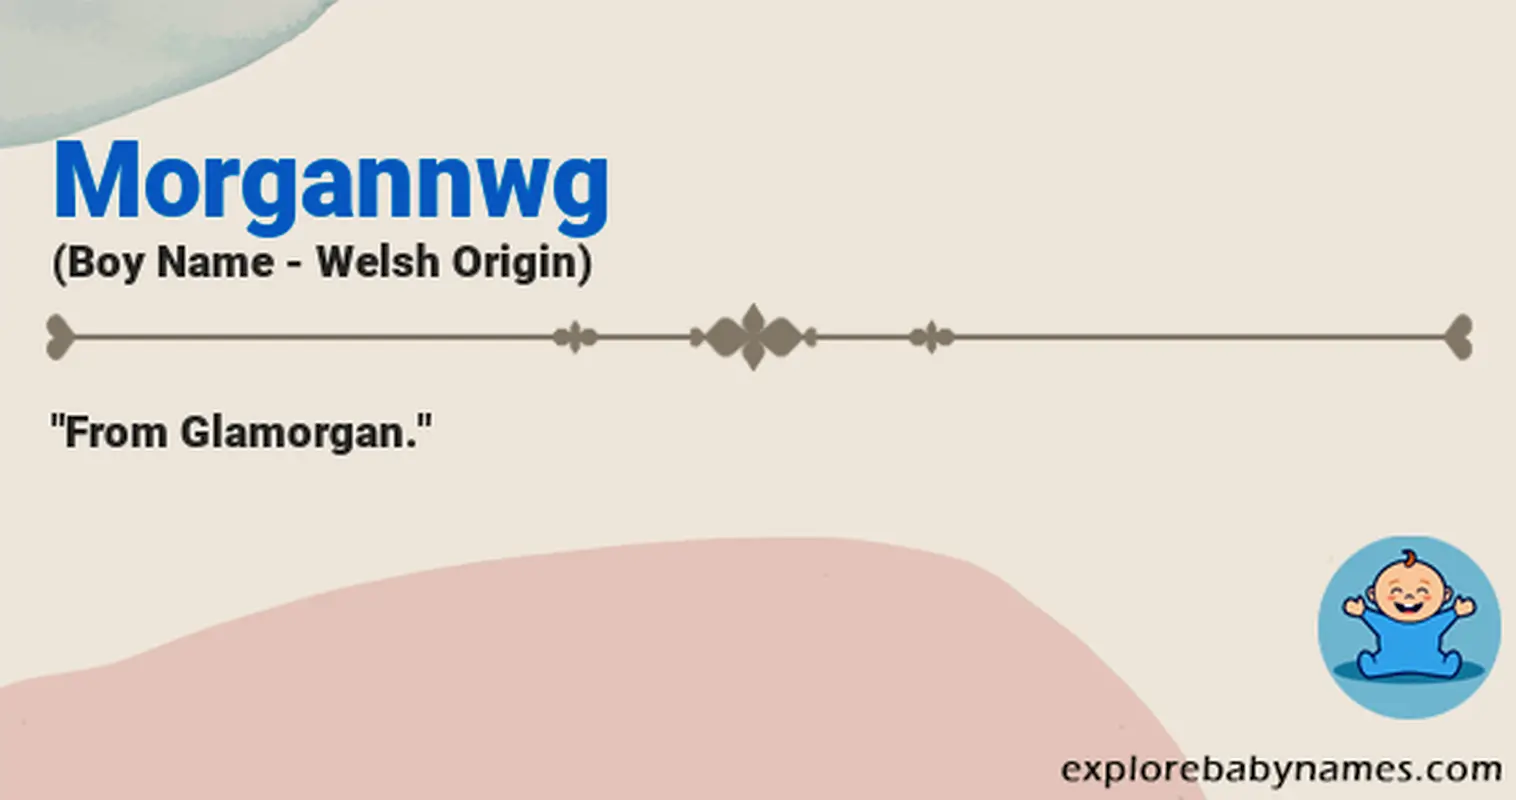 Meaning of Morgannwg